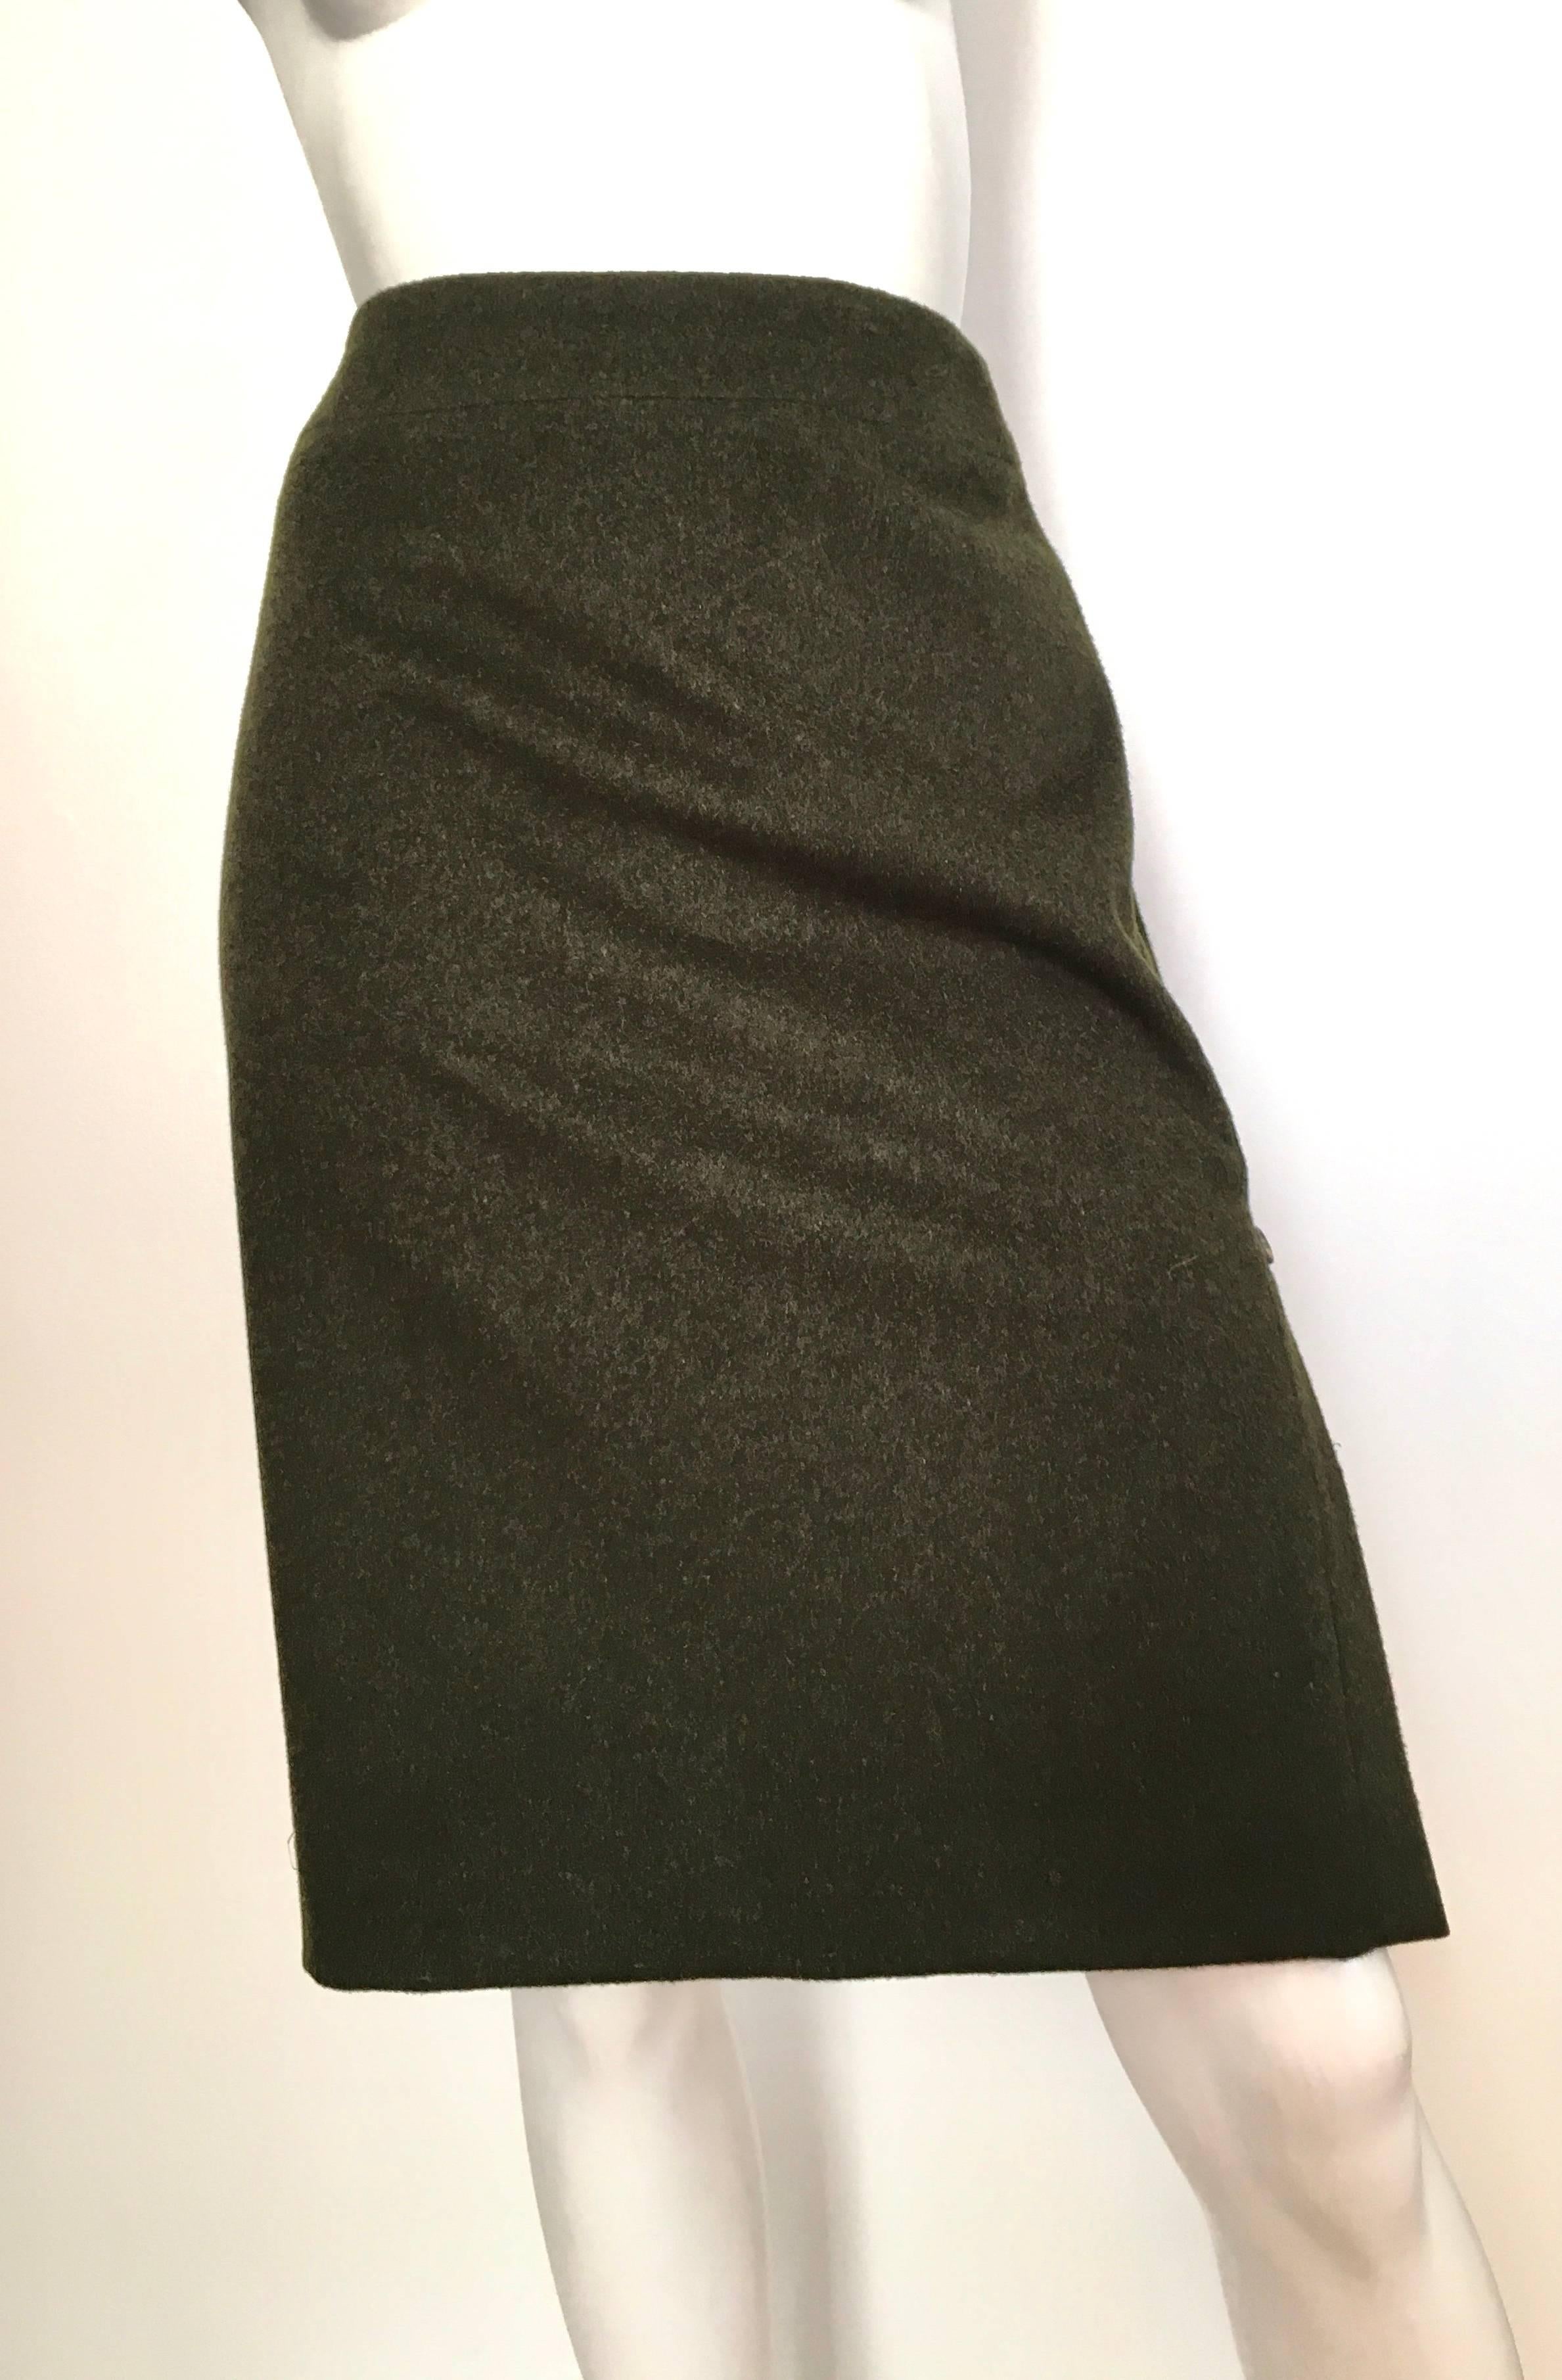 Carolina Herrera for Saks Fifth Avenue olive green wool & alpaca fabric skirt size 10. The last two button on the bottom are the only buttons that unbutton, the rest is pure decoration. Skirt is lined and made in Italy. Zipper on the back of